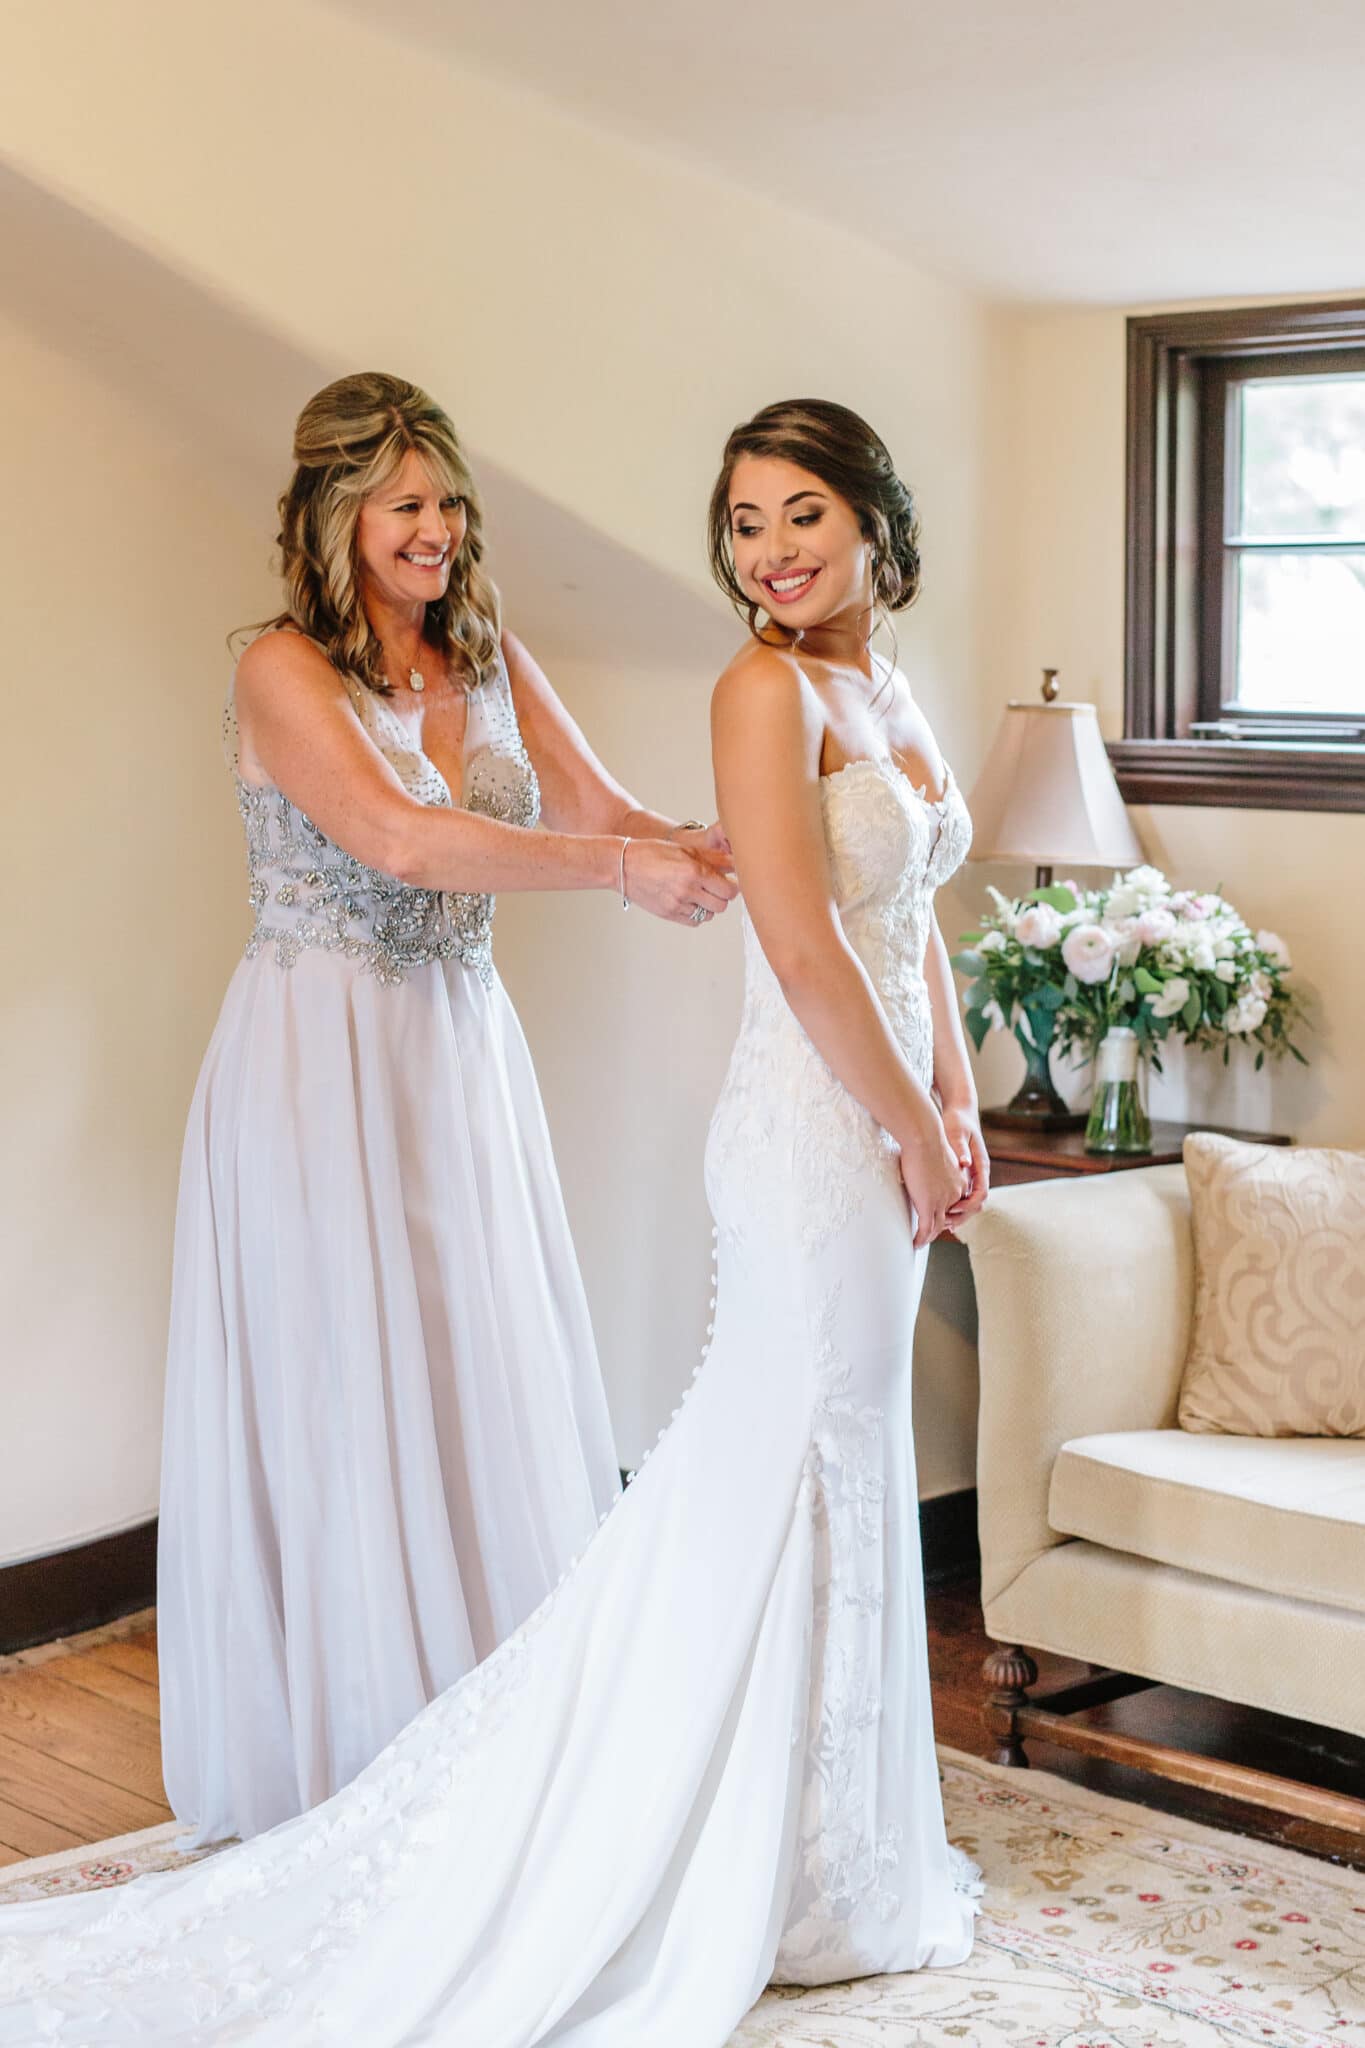 A bridesmaid helping a bride into her dress